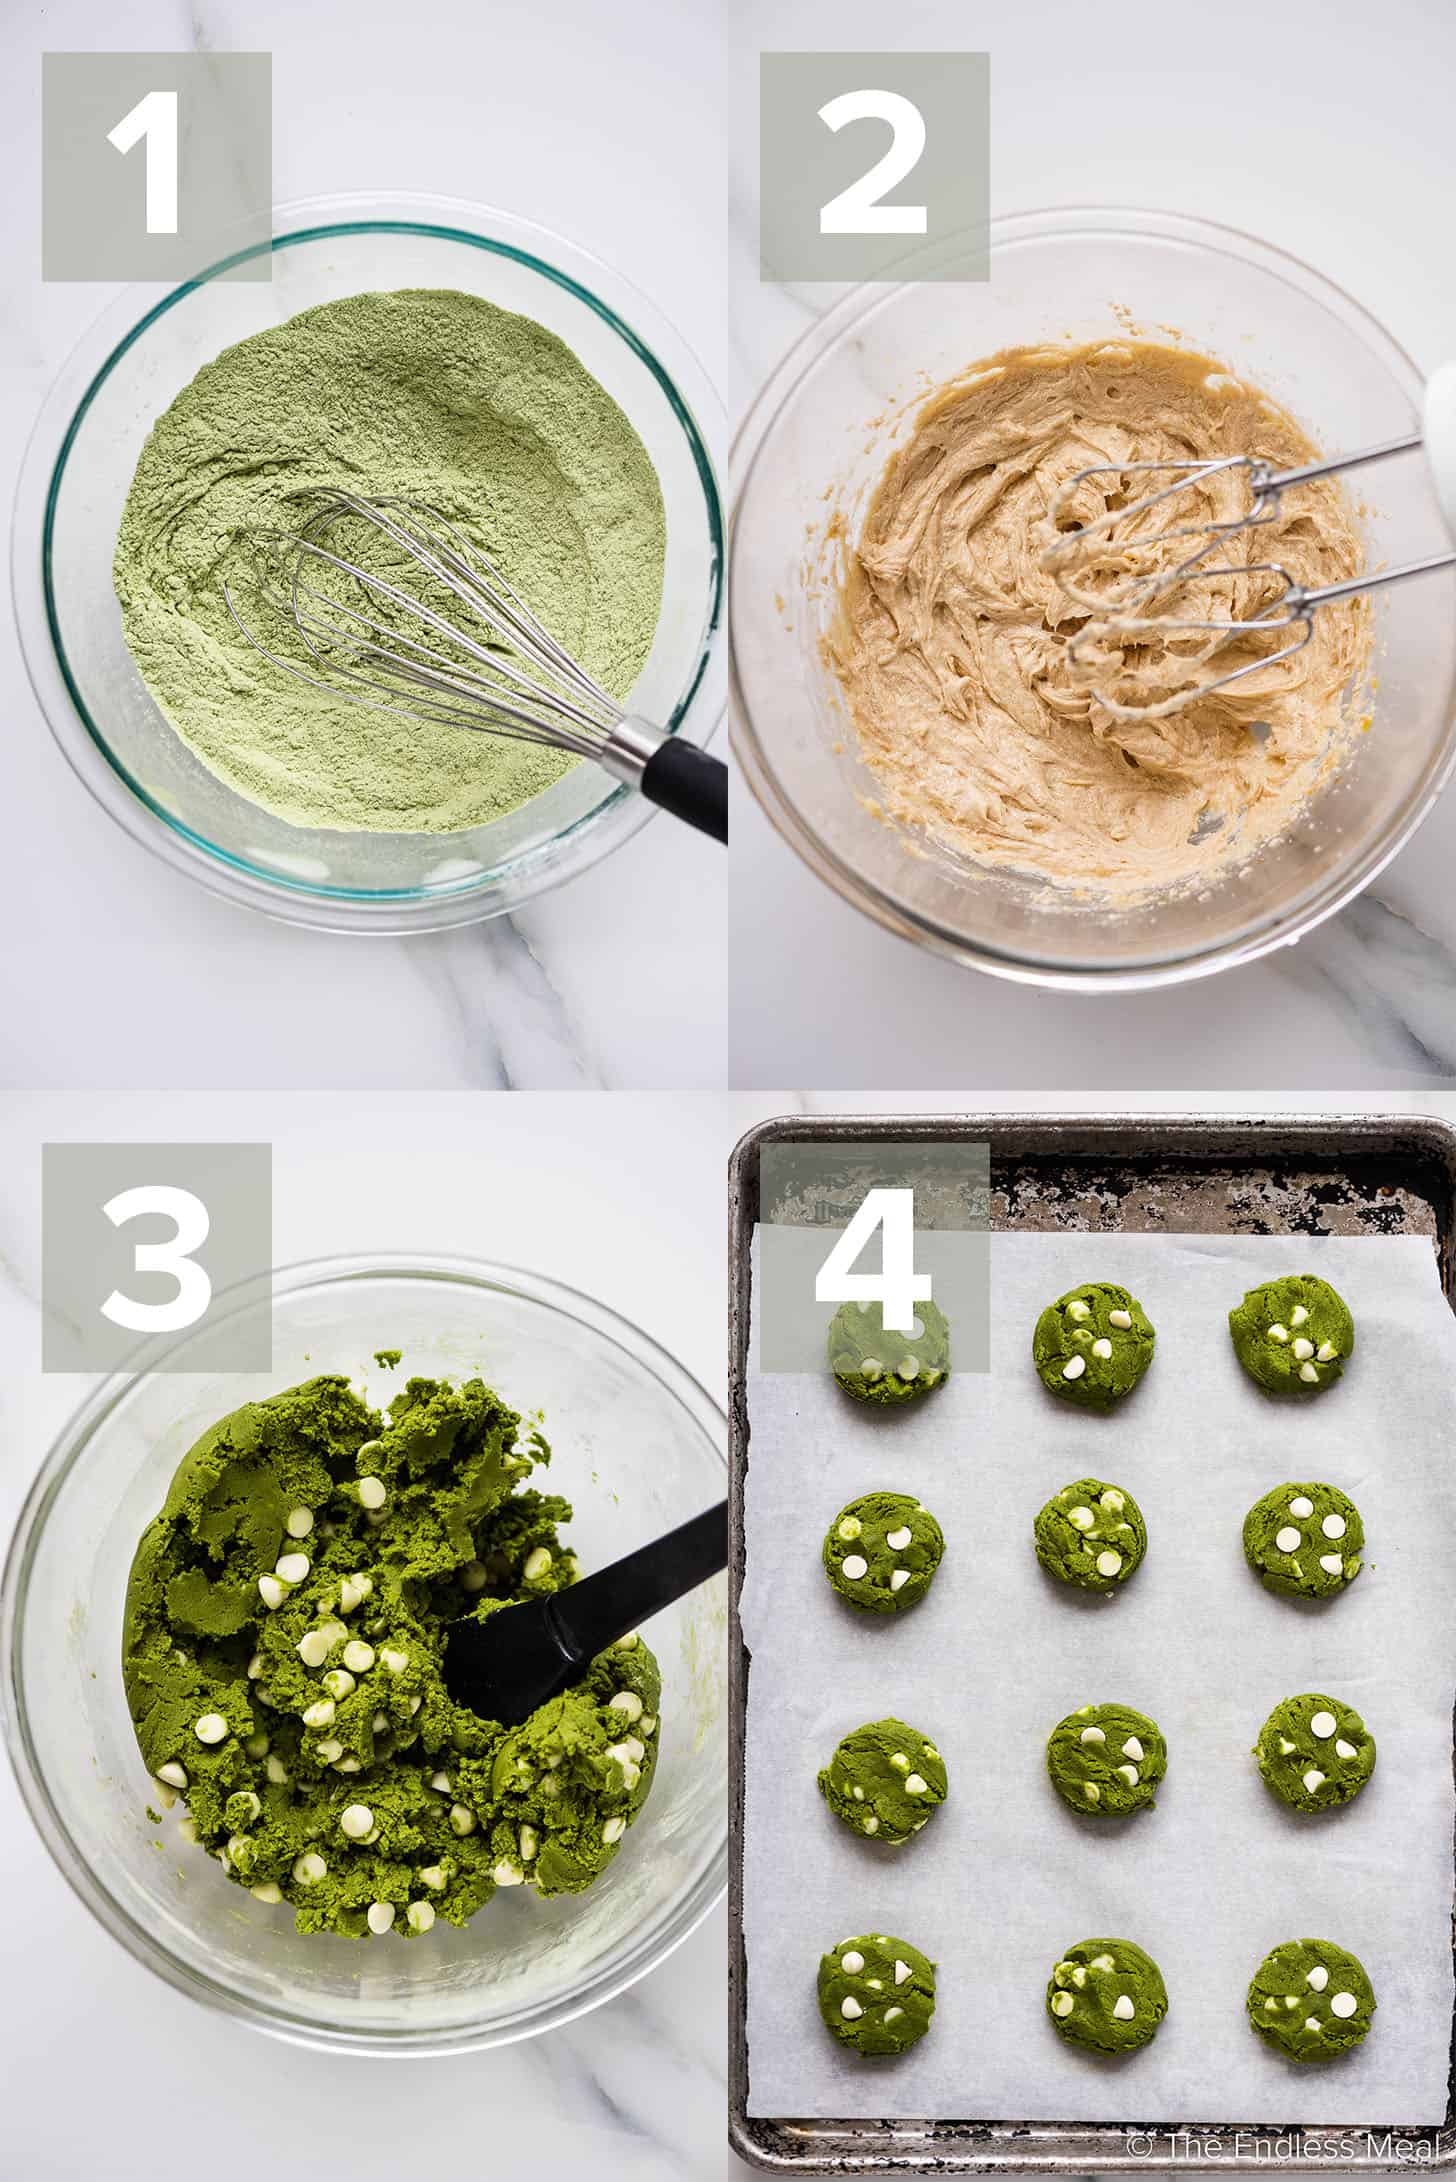 4 pictures showing how to make green tea matcha cookies